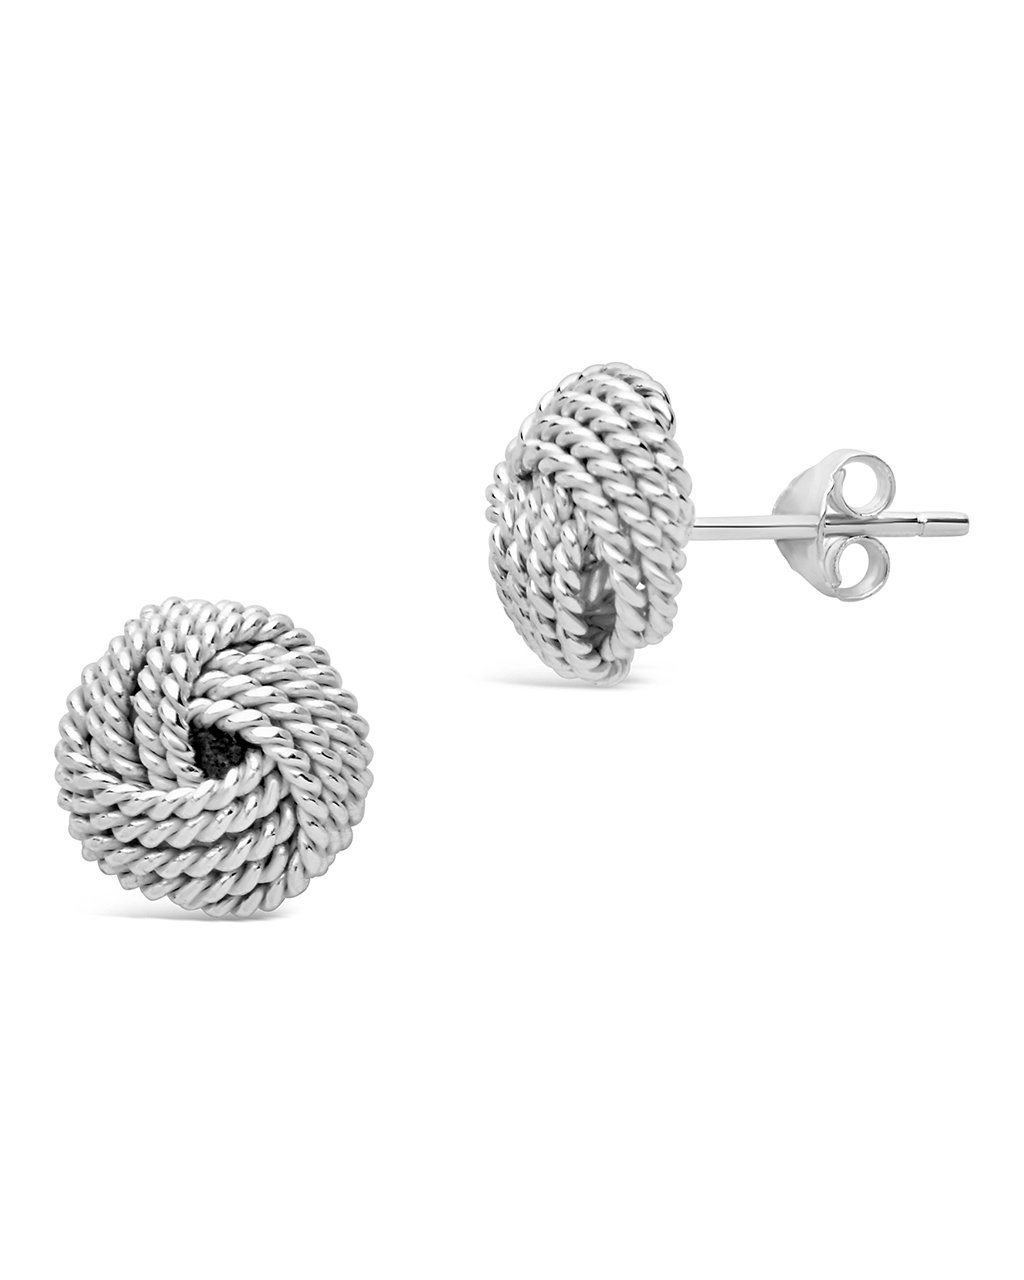 Sterling Silver 4mm Knot Earring Studs